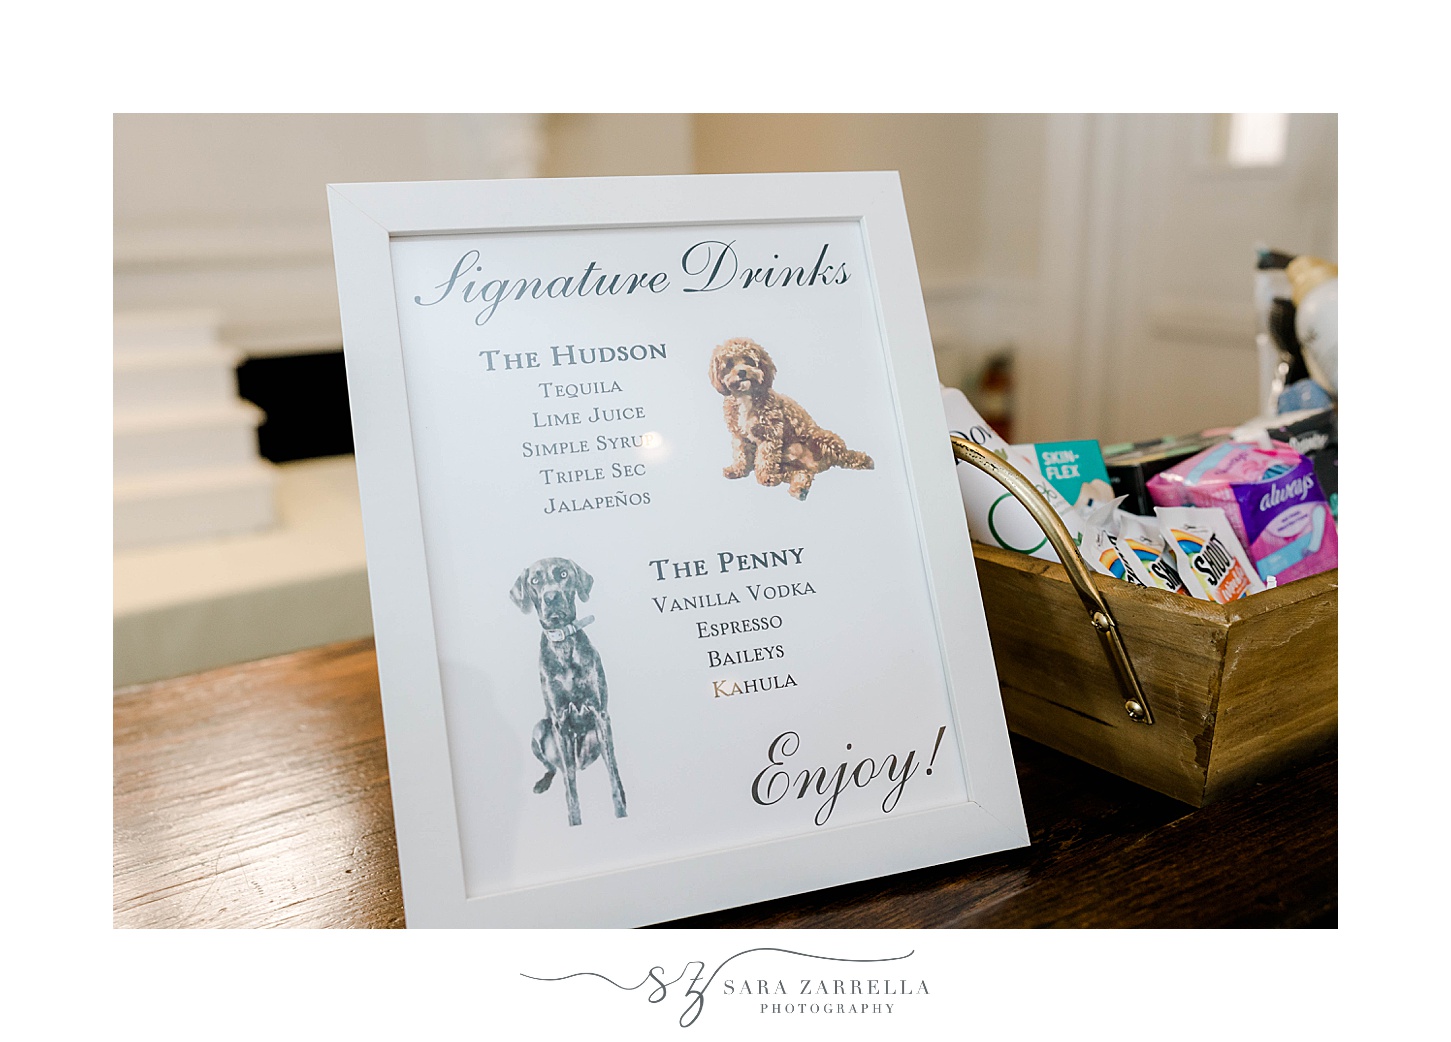 signature drinks inspired by couple's dogs for Newport RI wedding reception